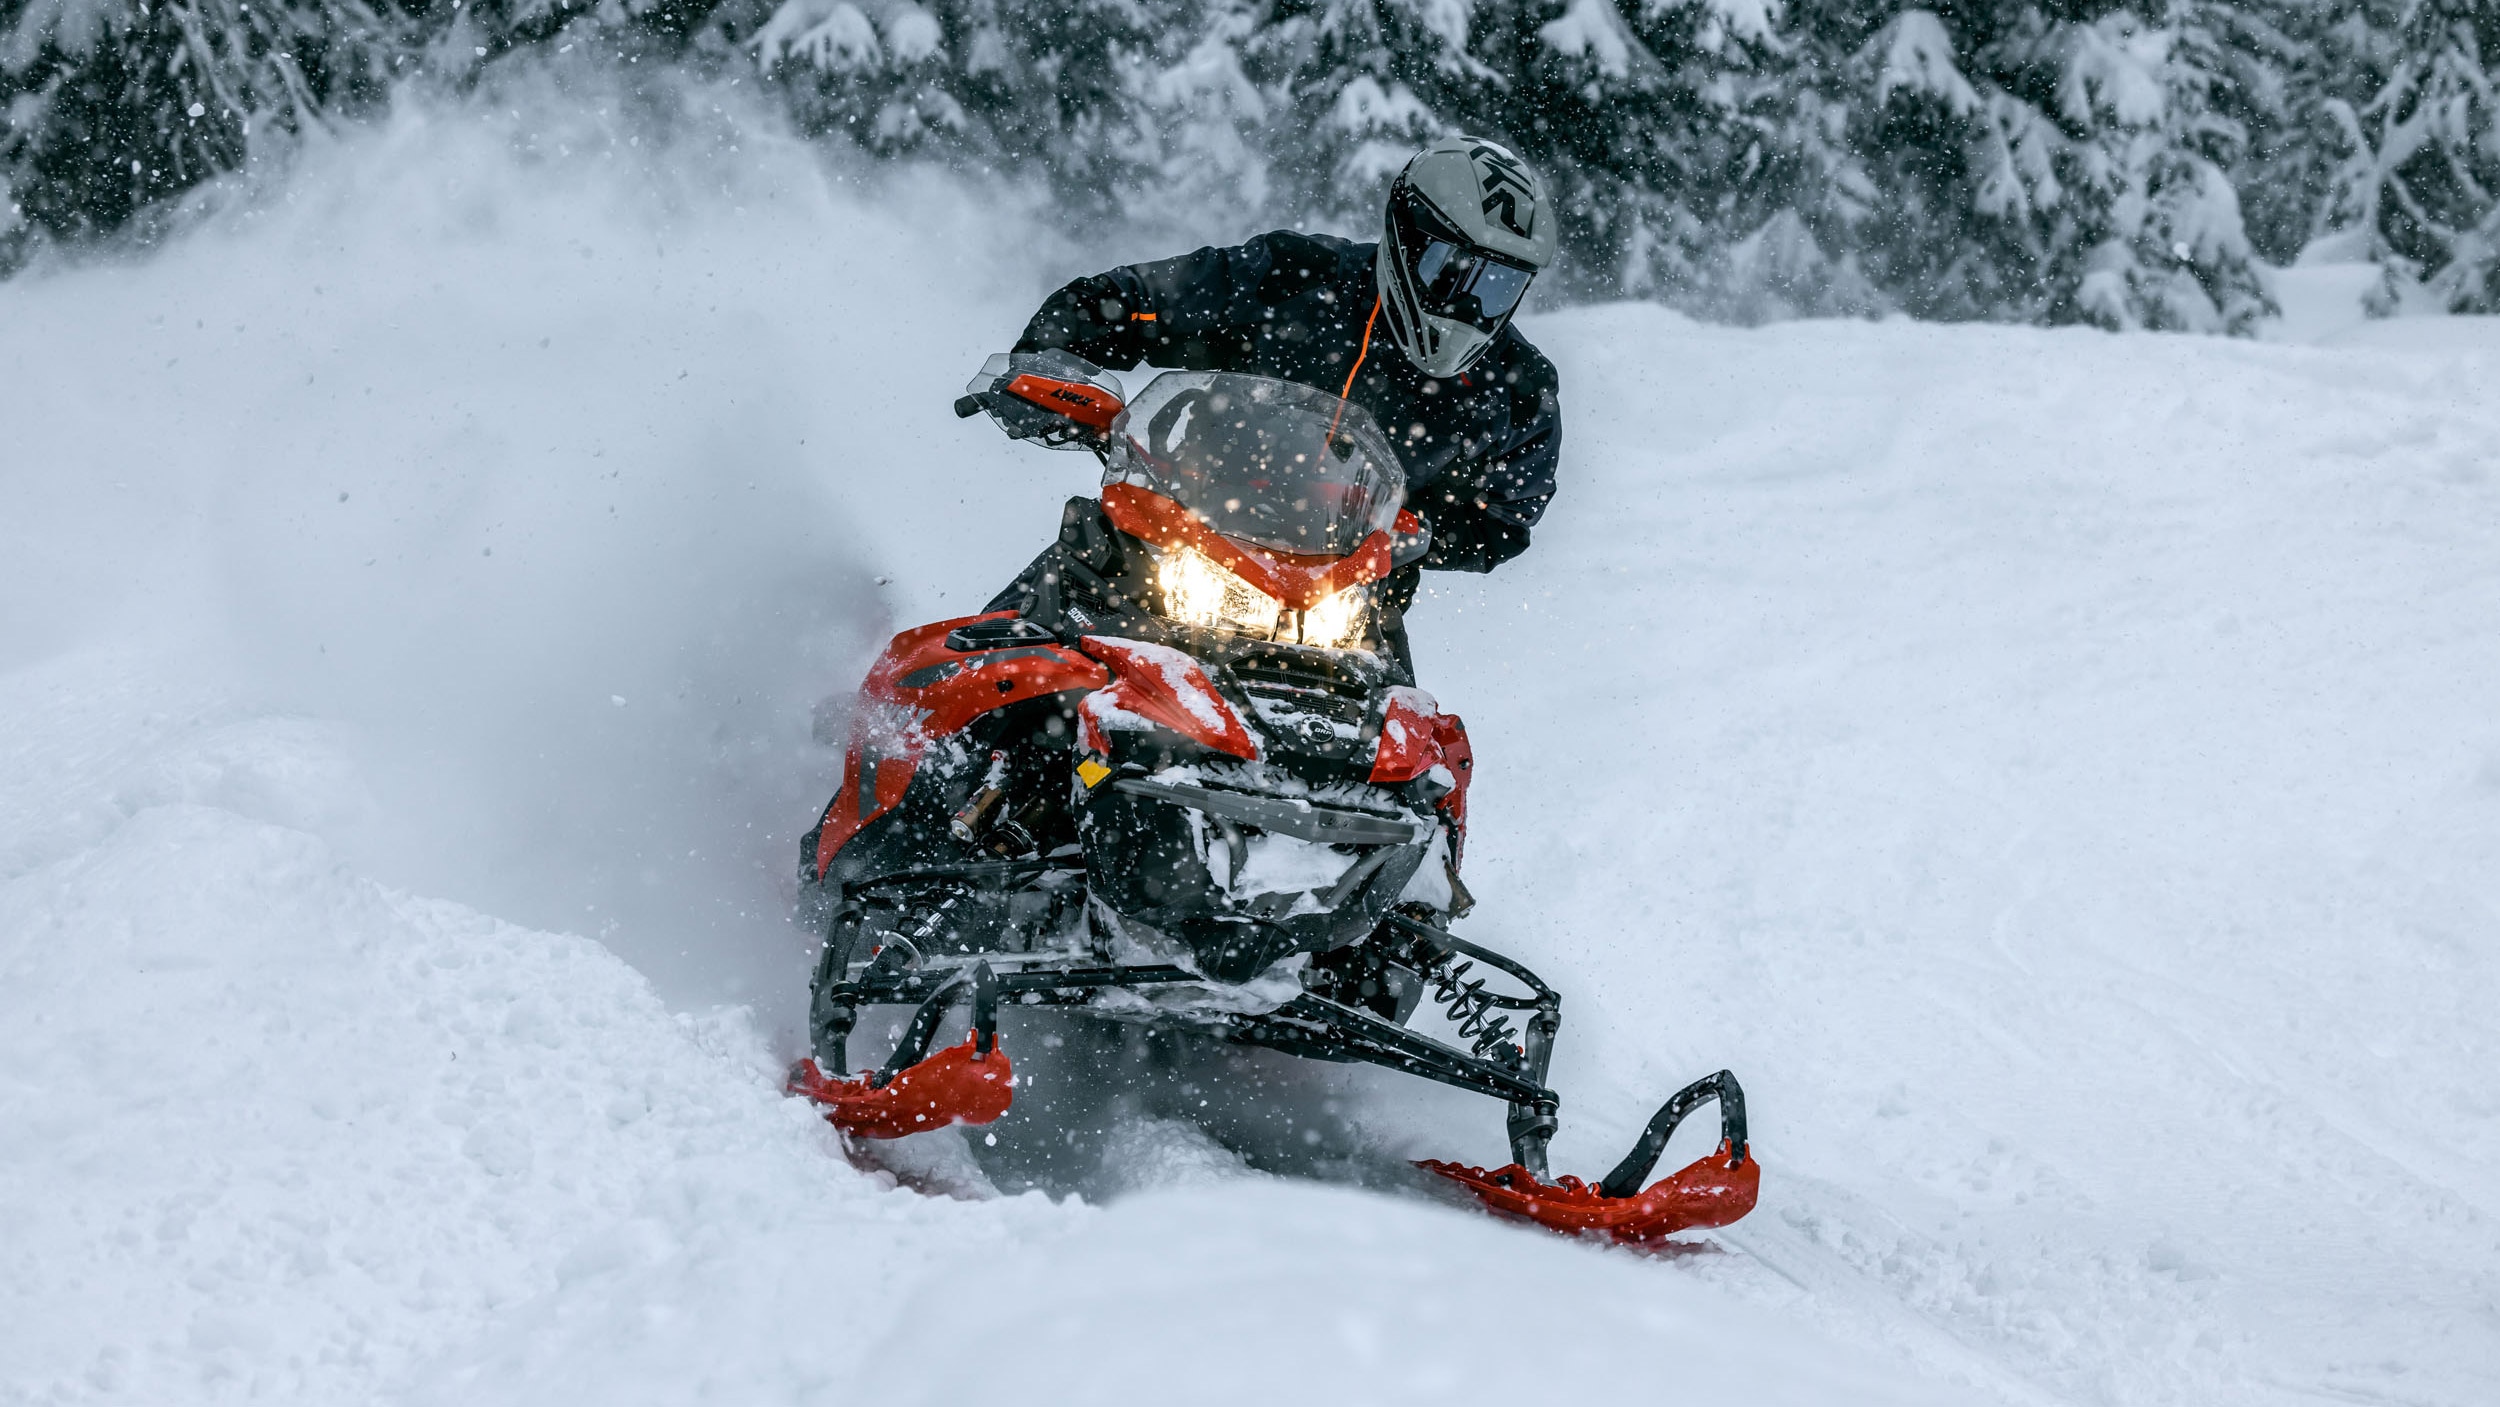 Rider blowing some snow on their Lynx snowmobile